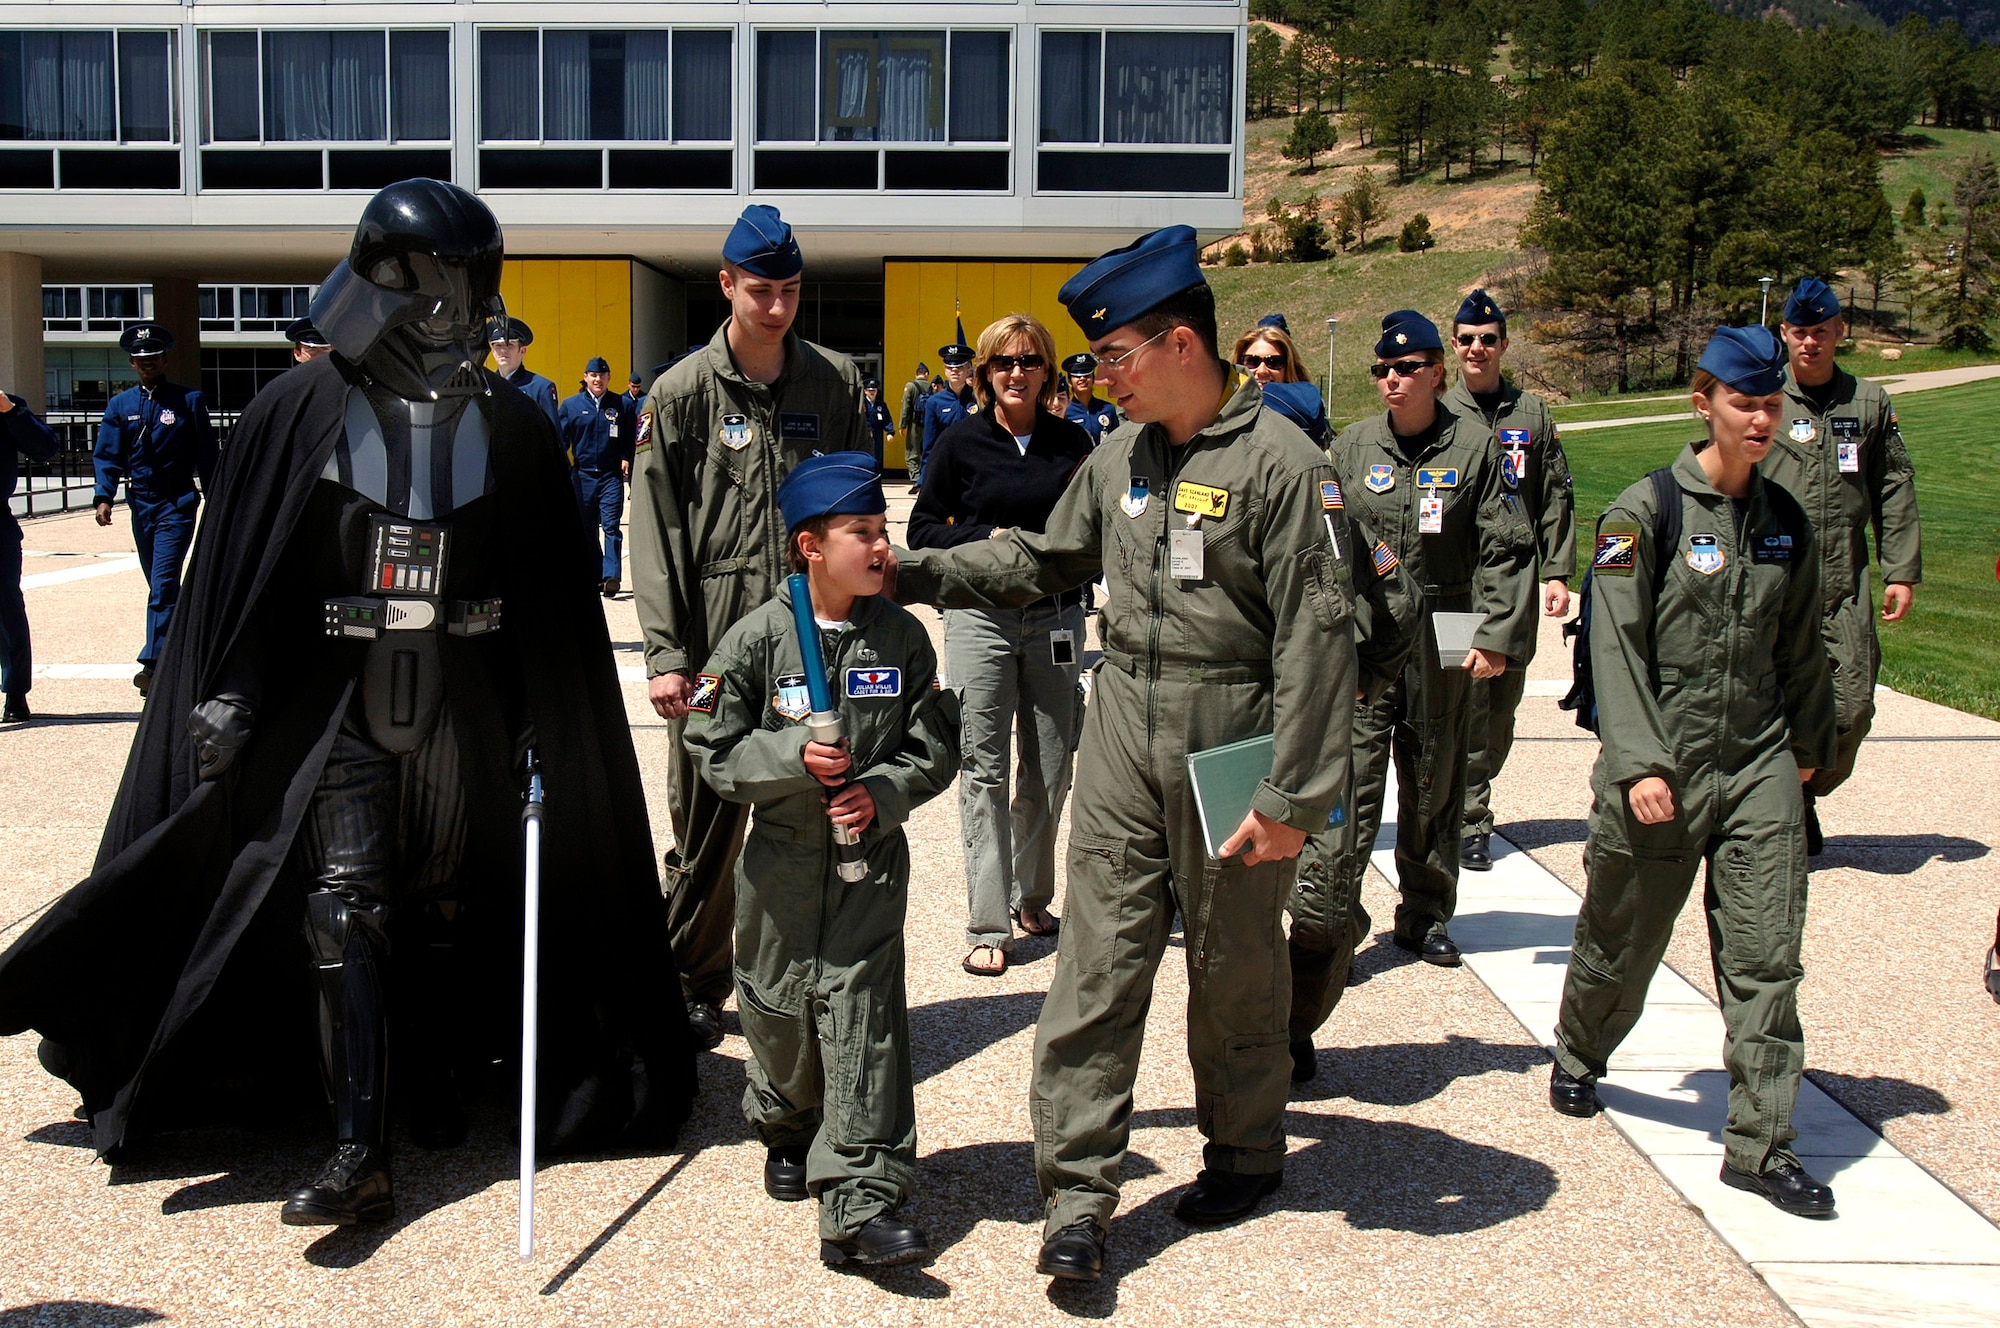 Ten-year-old Julian Willis is escorted by the Darth Vader character and cadets of squadron 39 to the lunchtime formation at the U.S. Air Force Academy, Colo. The Make-a-Wish Foundation and the Air Force Academy made Julian a "Cadet for a Day". Cadets have sponsored 22 children since the program started in 2000. (U.S. Air Force photo/Mike Kaplan)